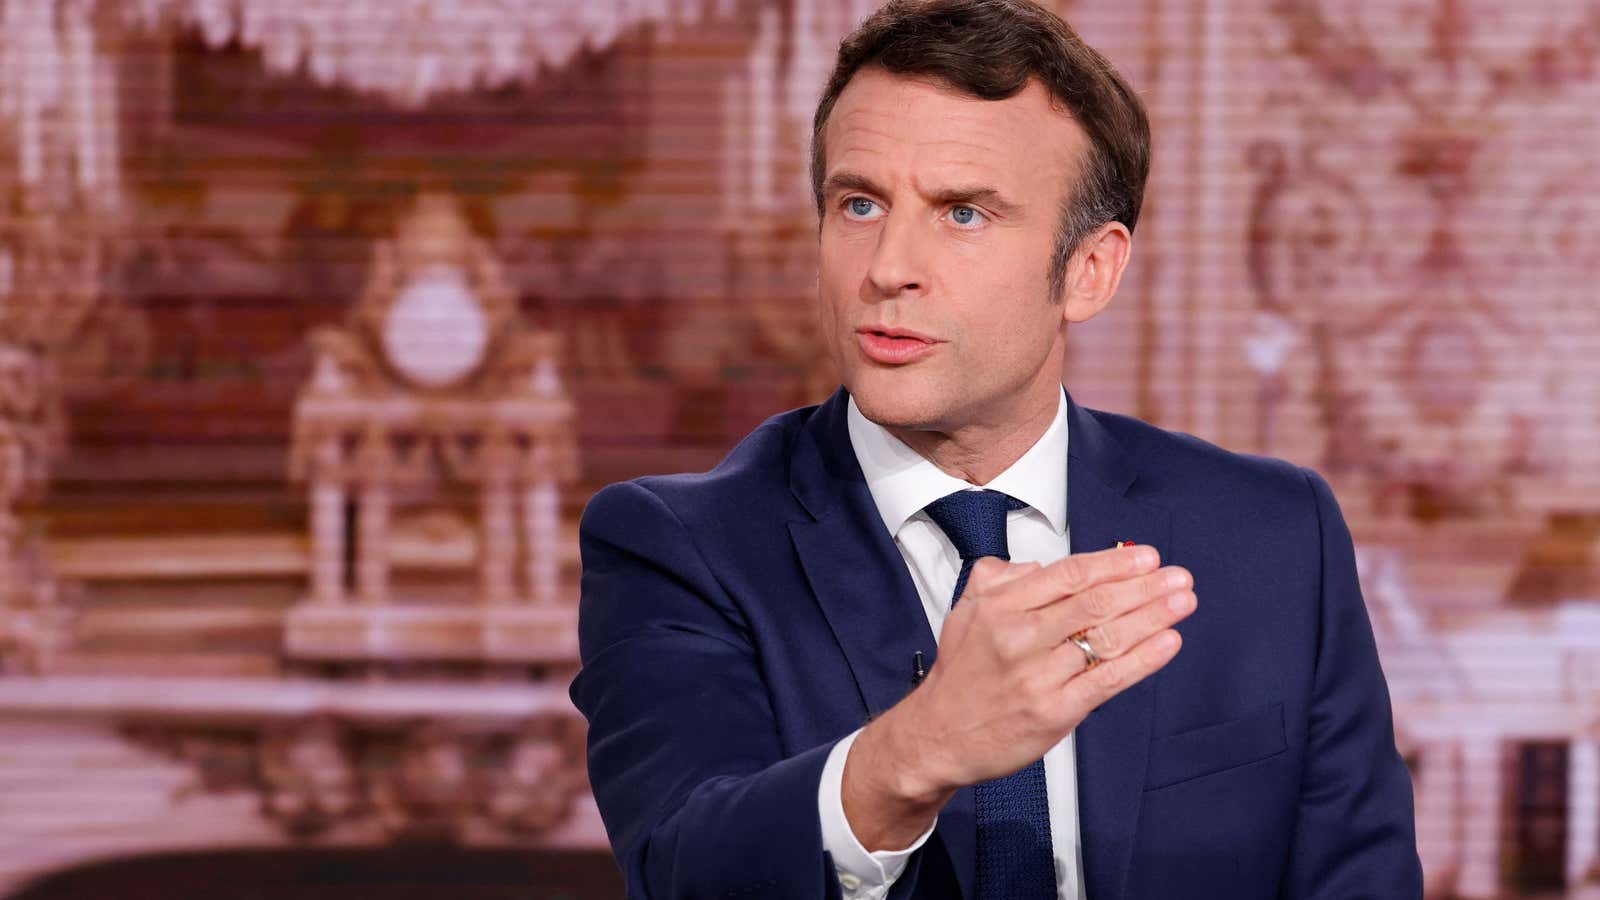 Macron is under fire for his use of consultancies like McKinsey.